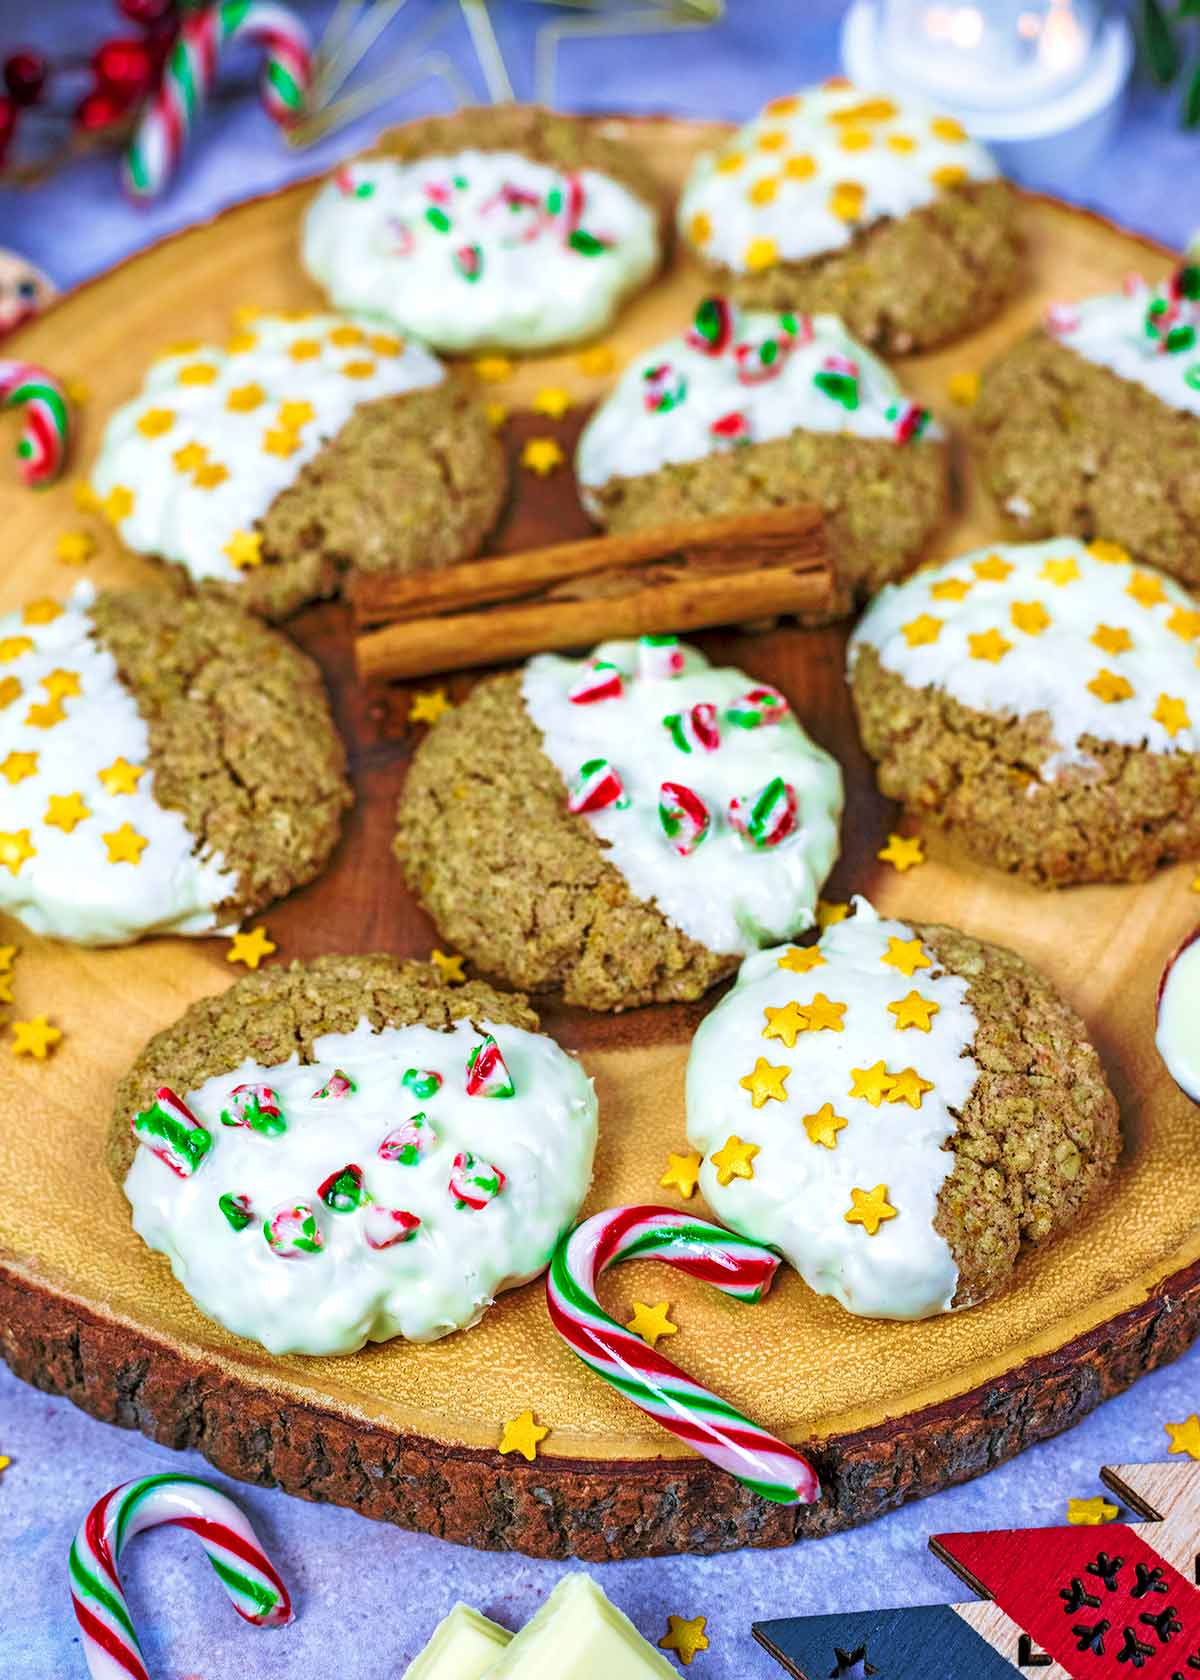 Decorated cookies on a wooden board with cinnamon sticks.